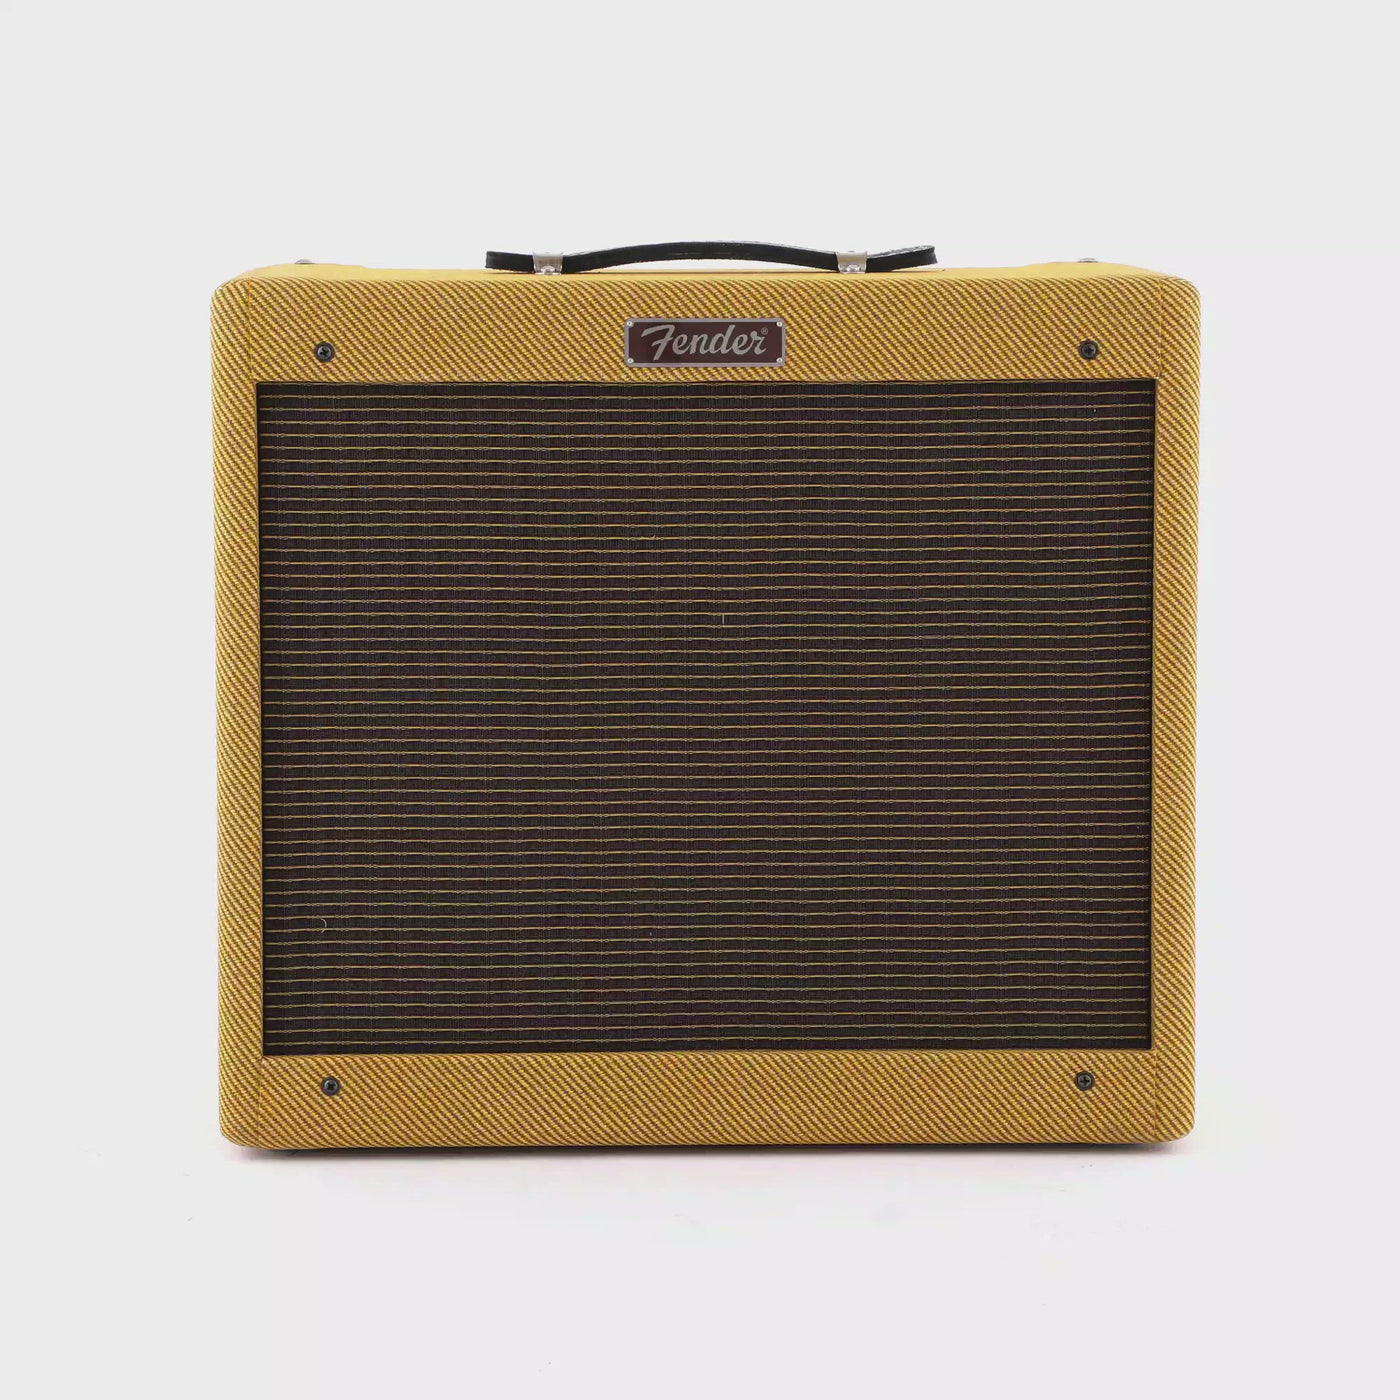 Fender Blues Junior Lacquered Tweed 15W Guitar Combo Amplifier